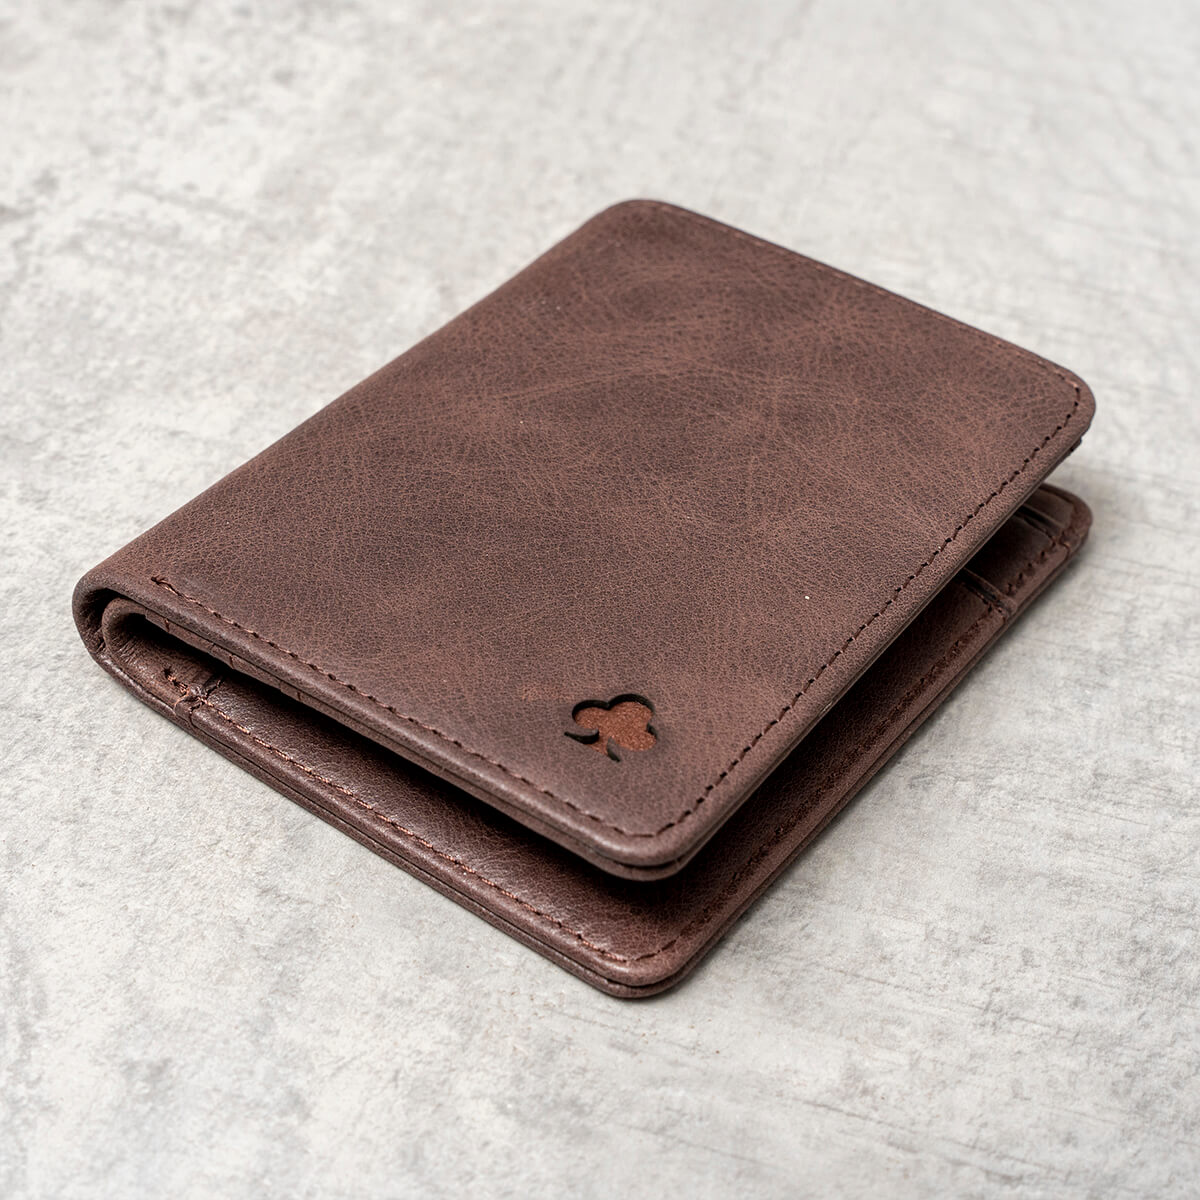 Porter Riley - Genuine Leather Men’s Billfold Wallet (RFID Blocking with 5 Credit Card Slots) Microfibre Lined Cash Compartment (Bifold) (Chocolate Brown)